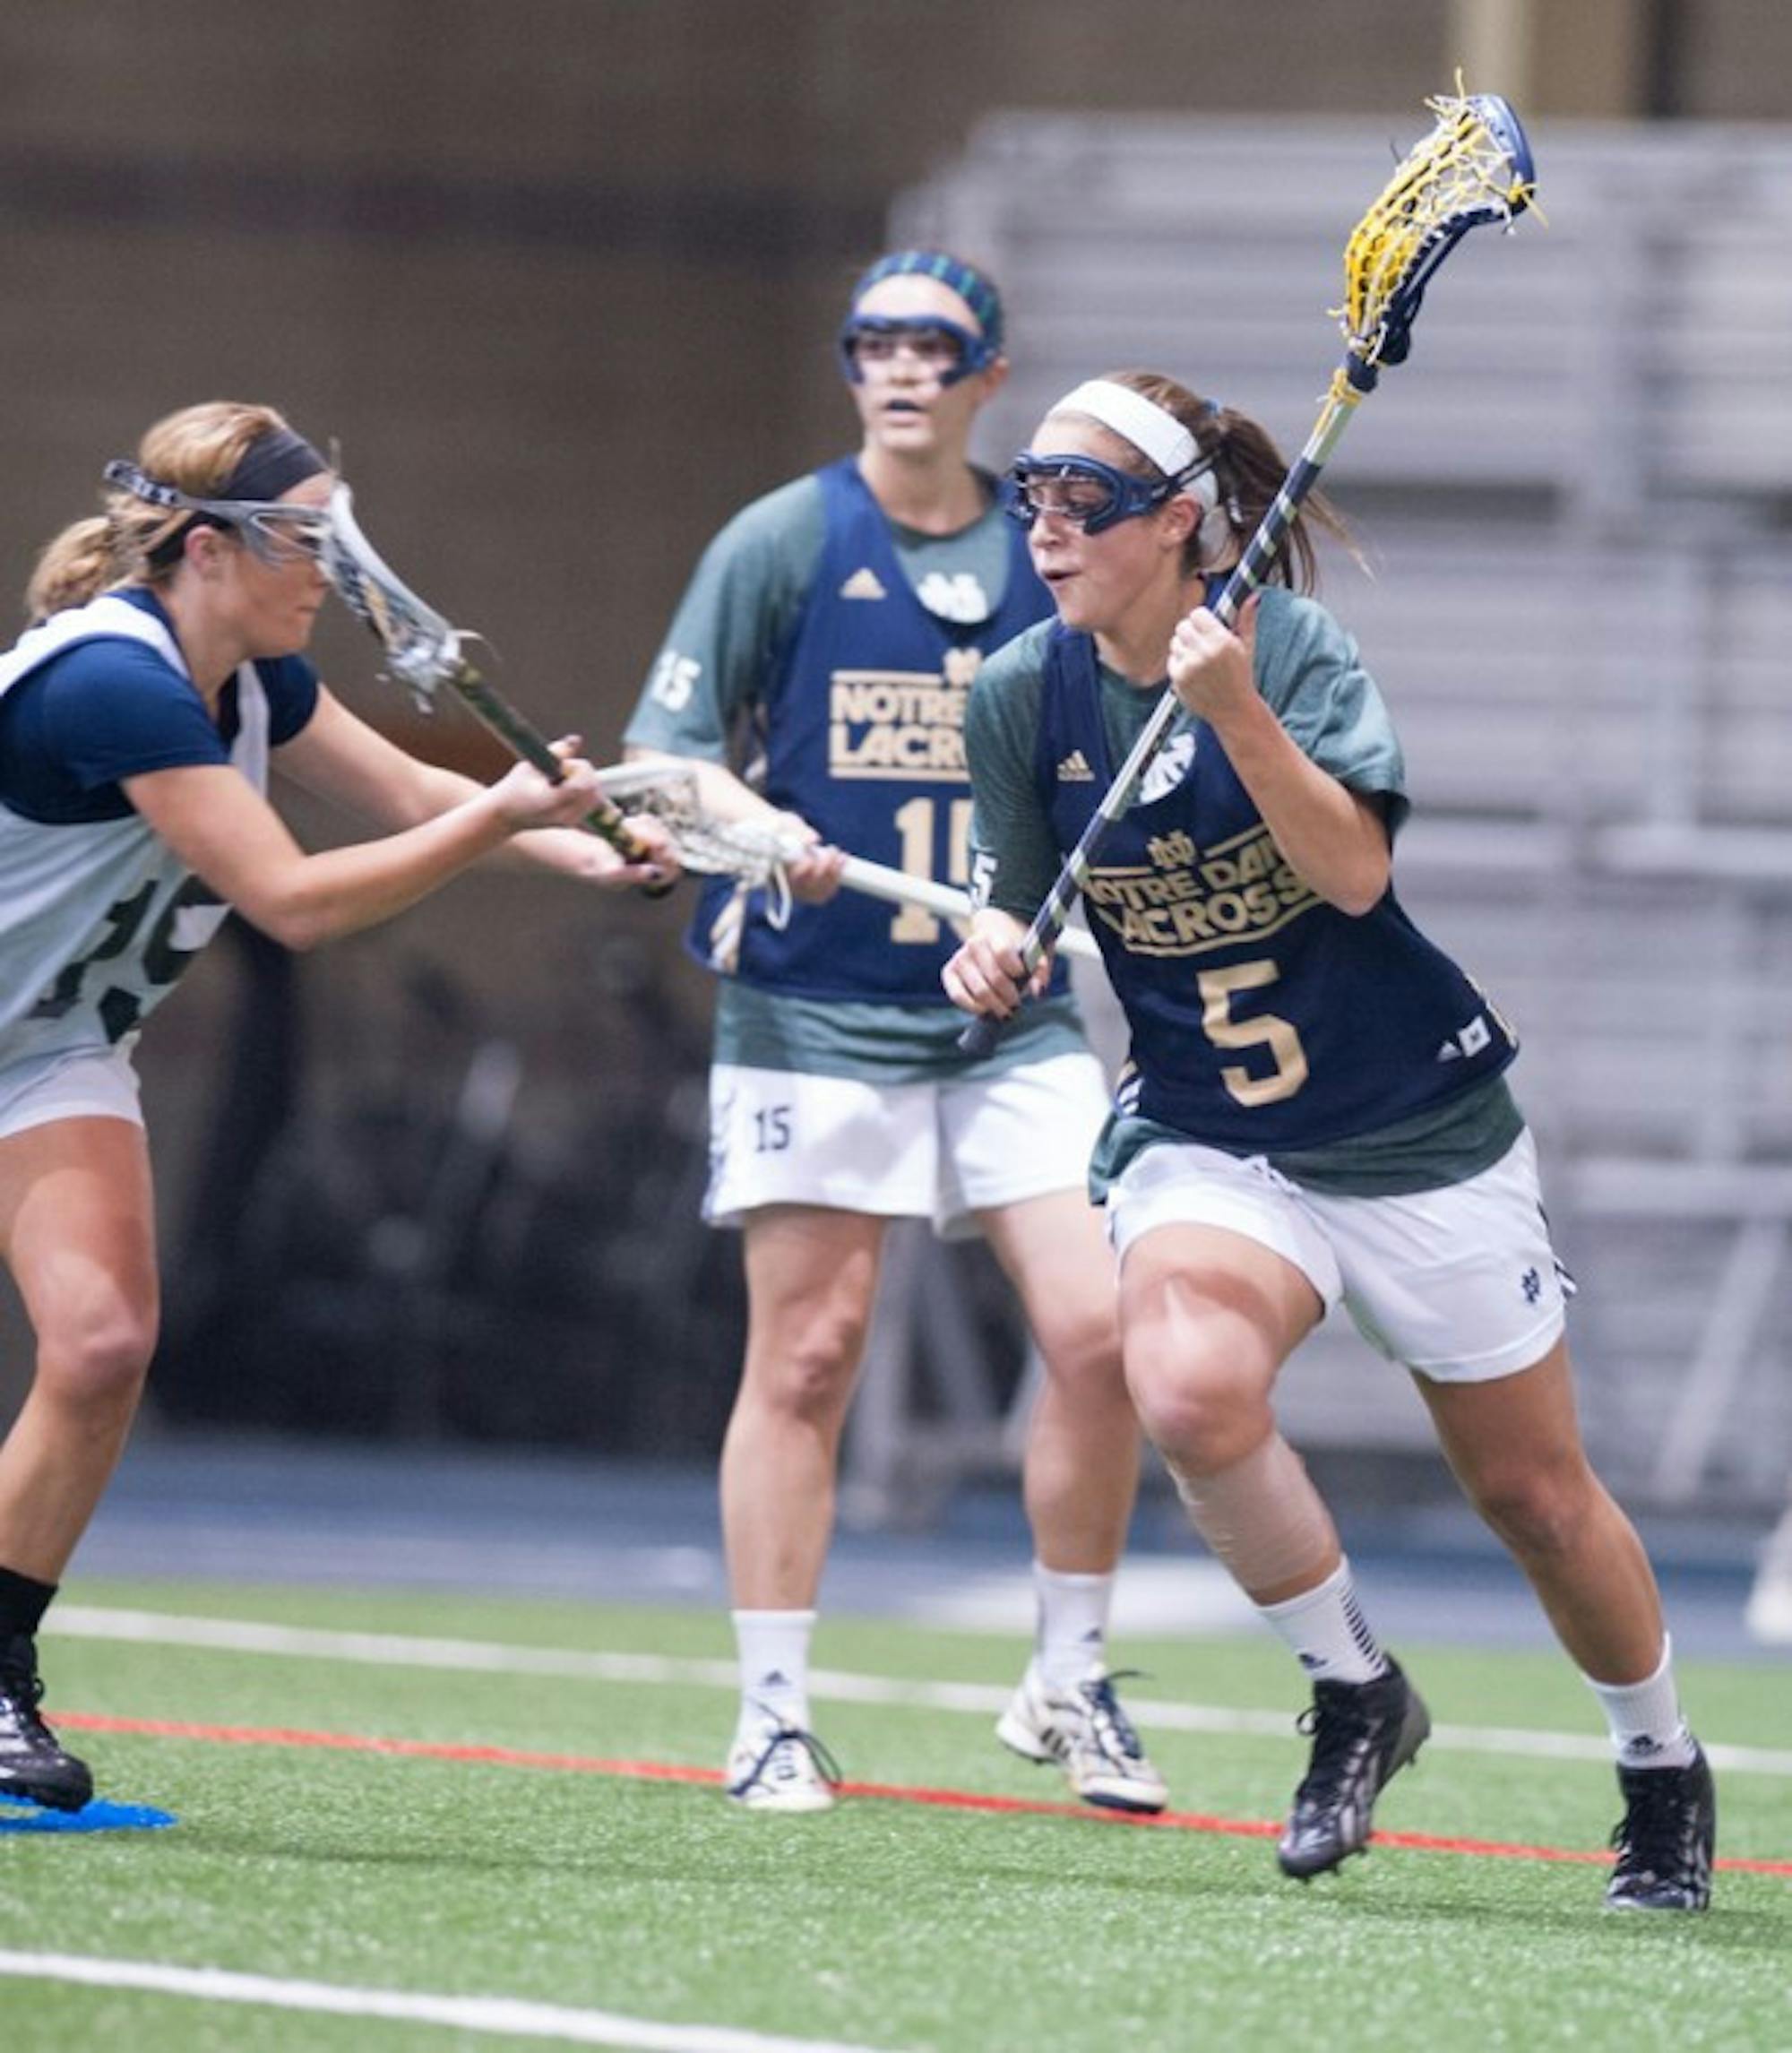 Irish sophomore attacker Rachel Sexton, 5, carries the ball during Notre Dame’s 19-7 home win over Michigan in exhibition play Feb. 8.